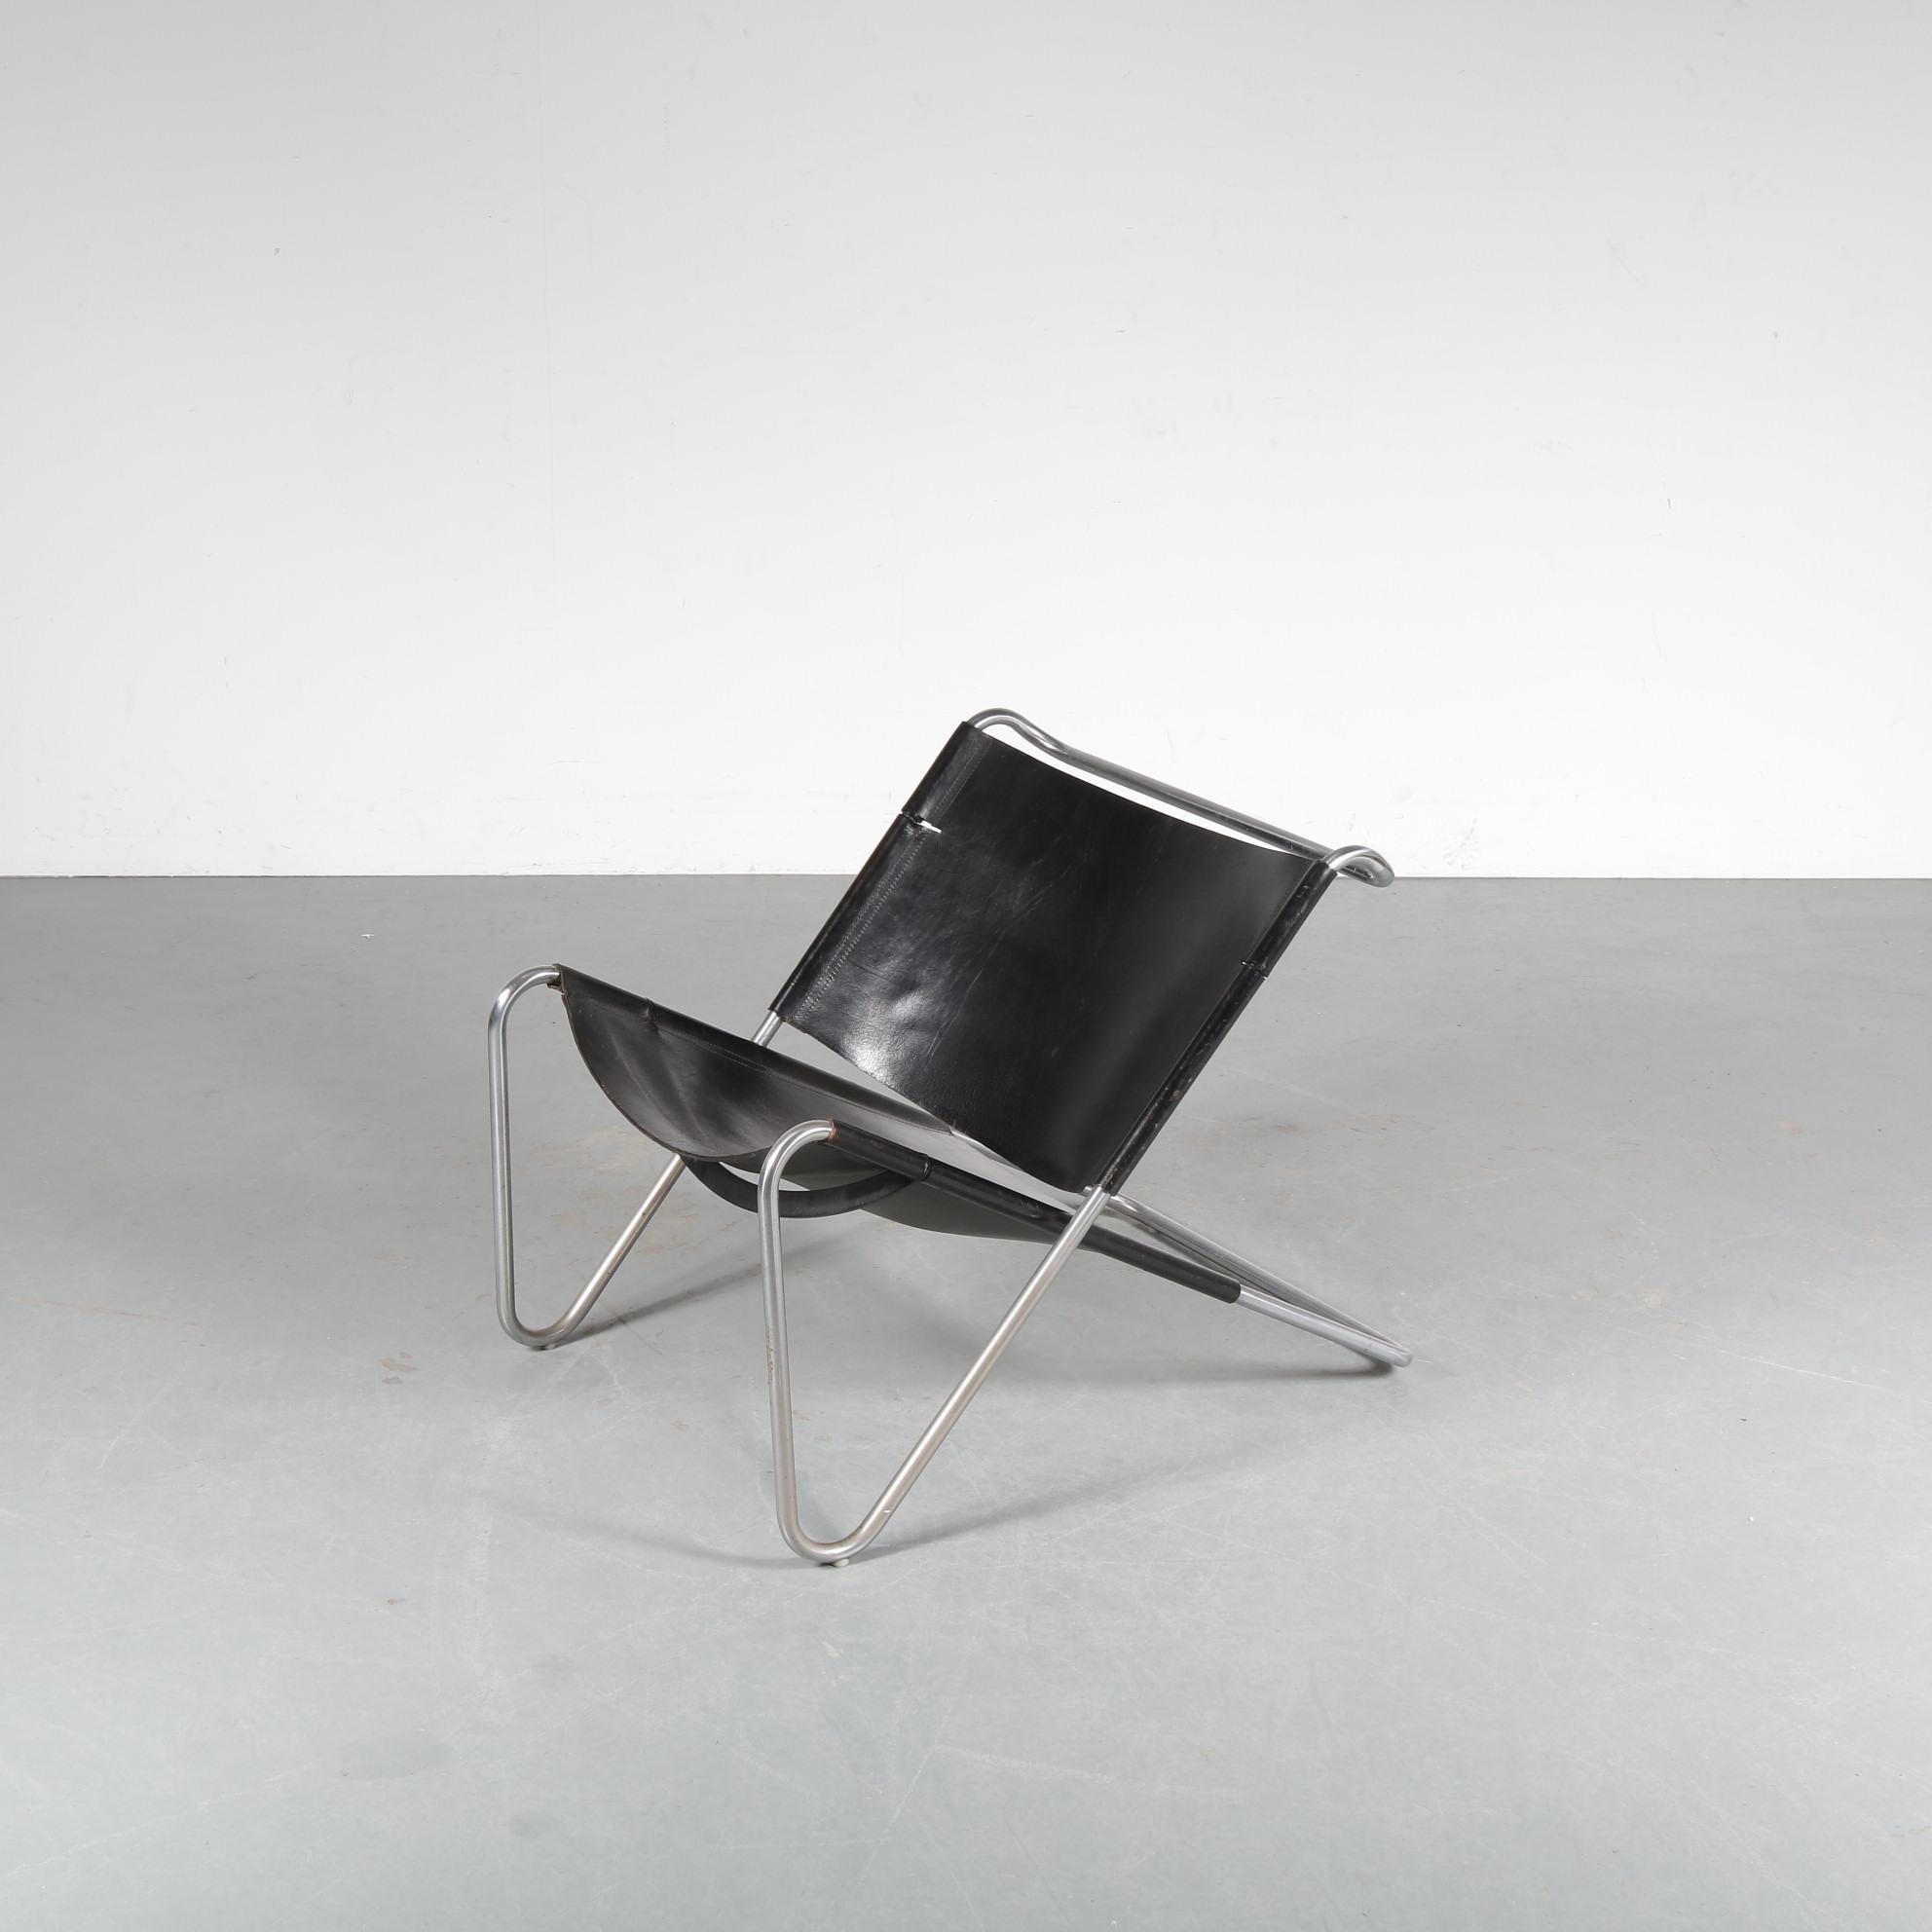 Dutch Kwok Hoi Chan Lounge Chair for Spectrum, Netherlands 1970